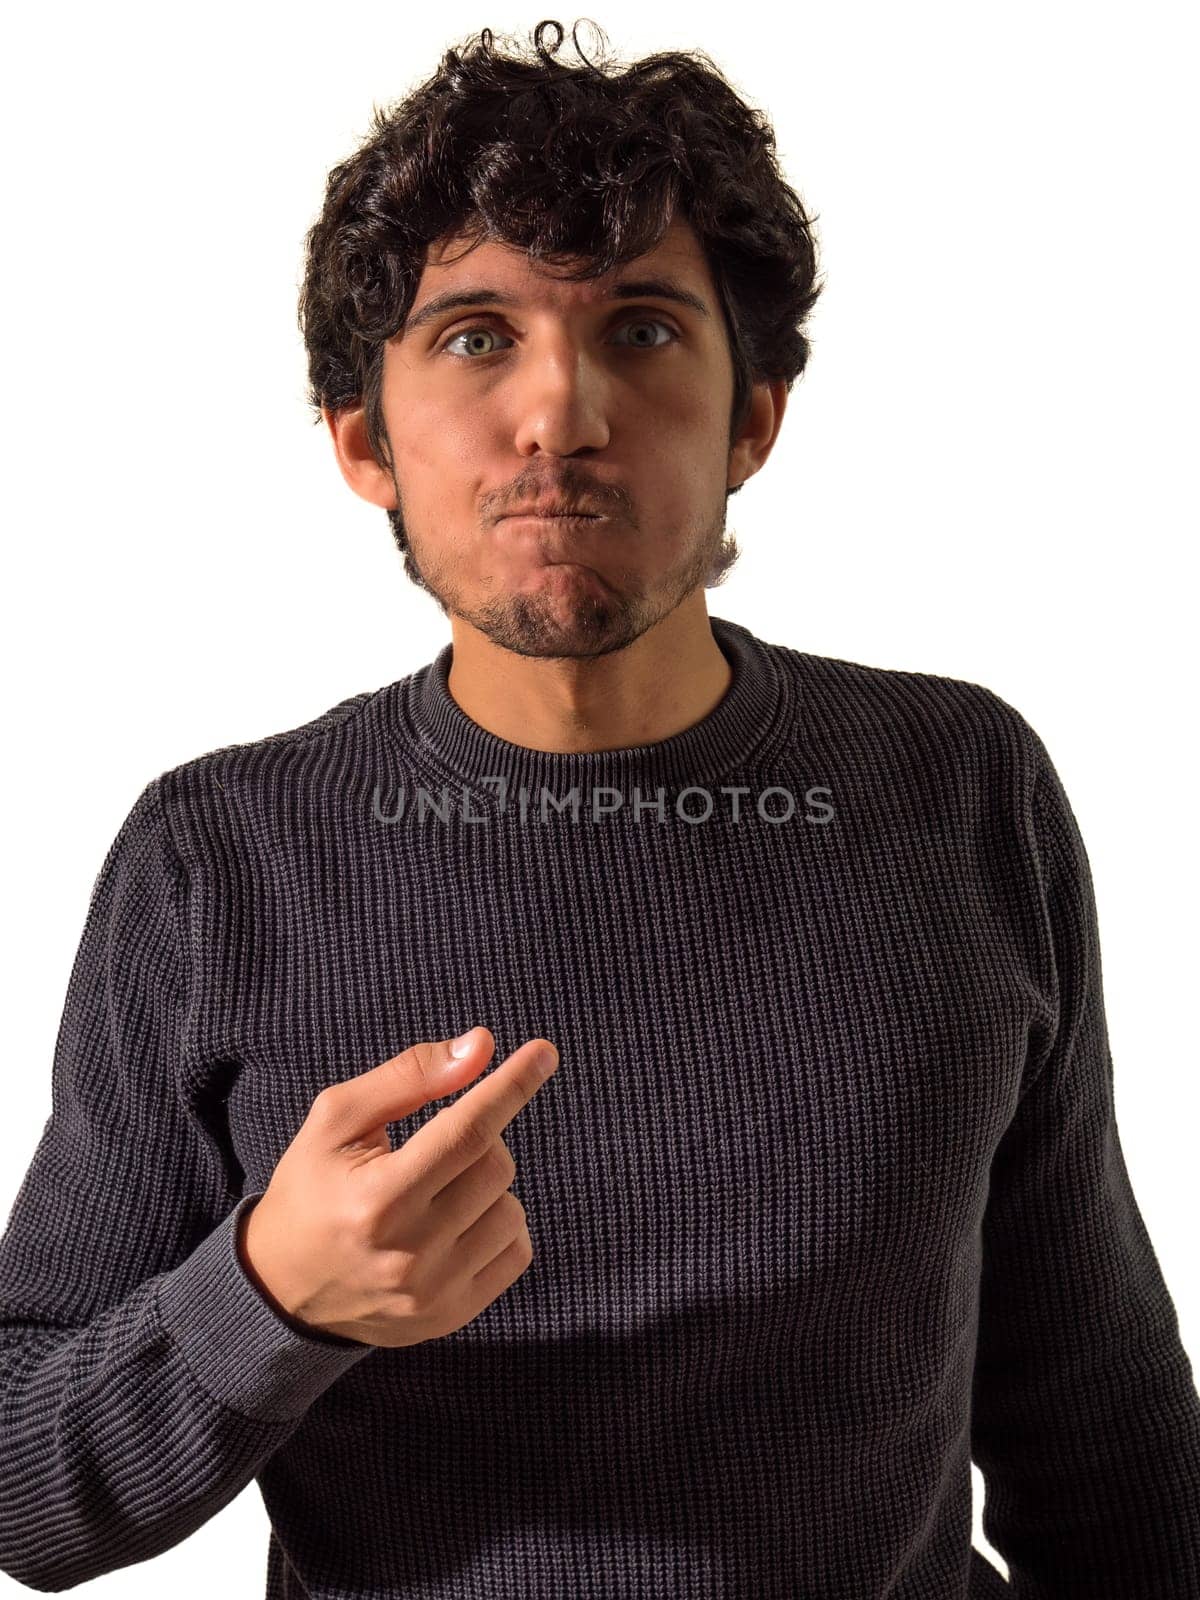 A man making a funny face with his finger